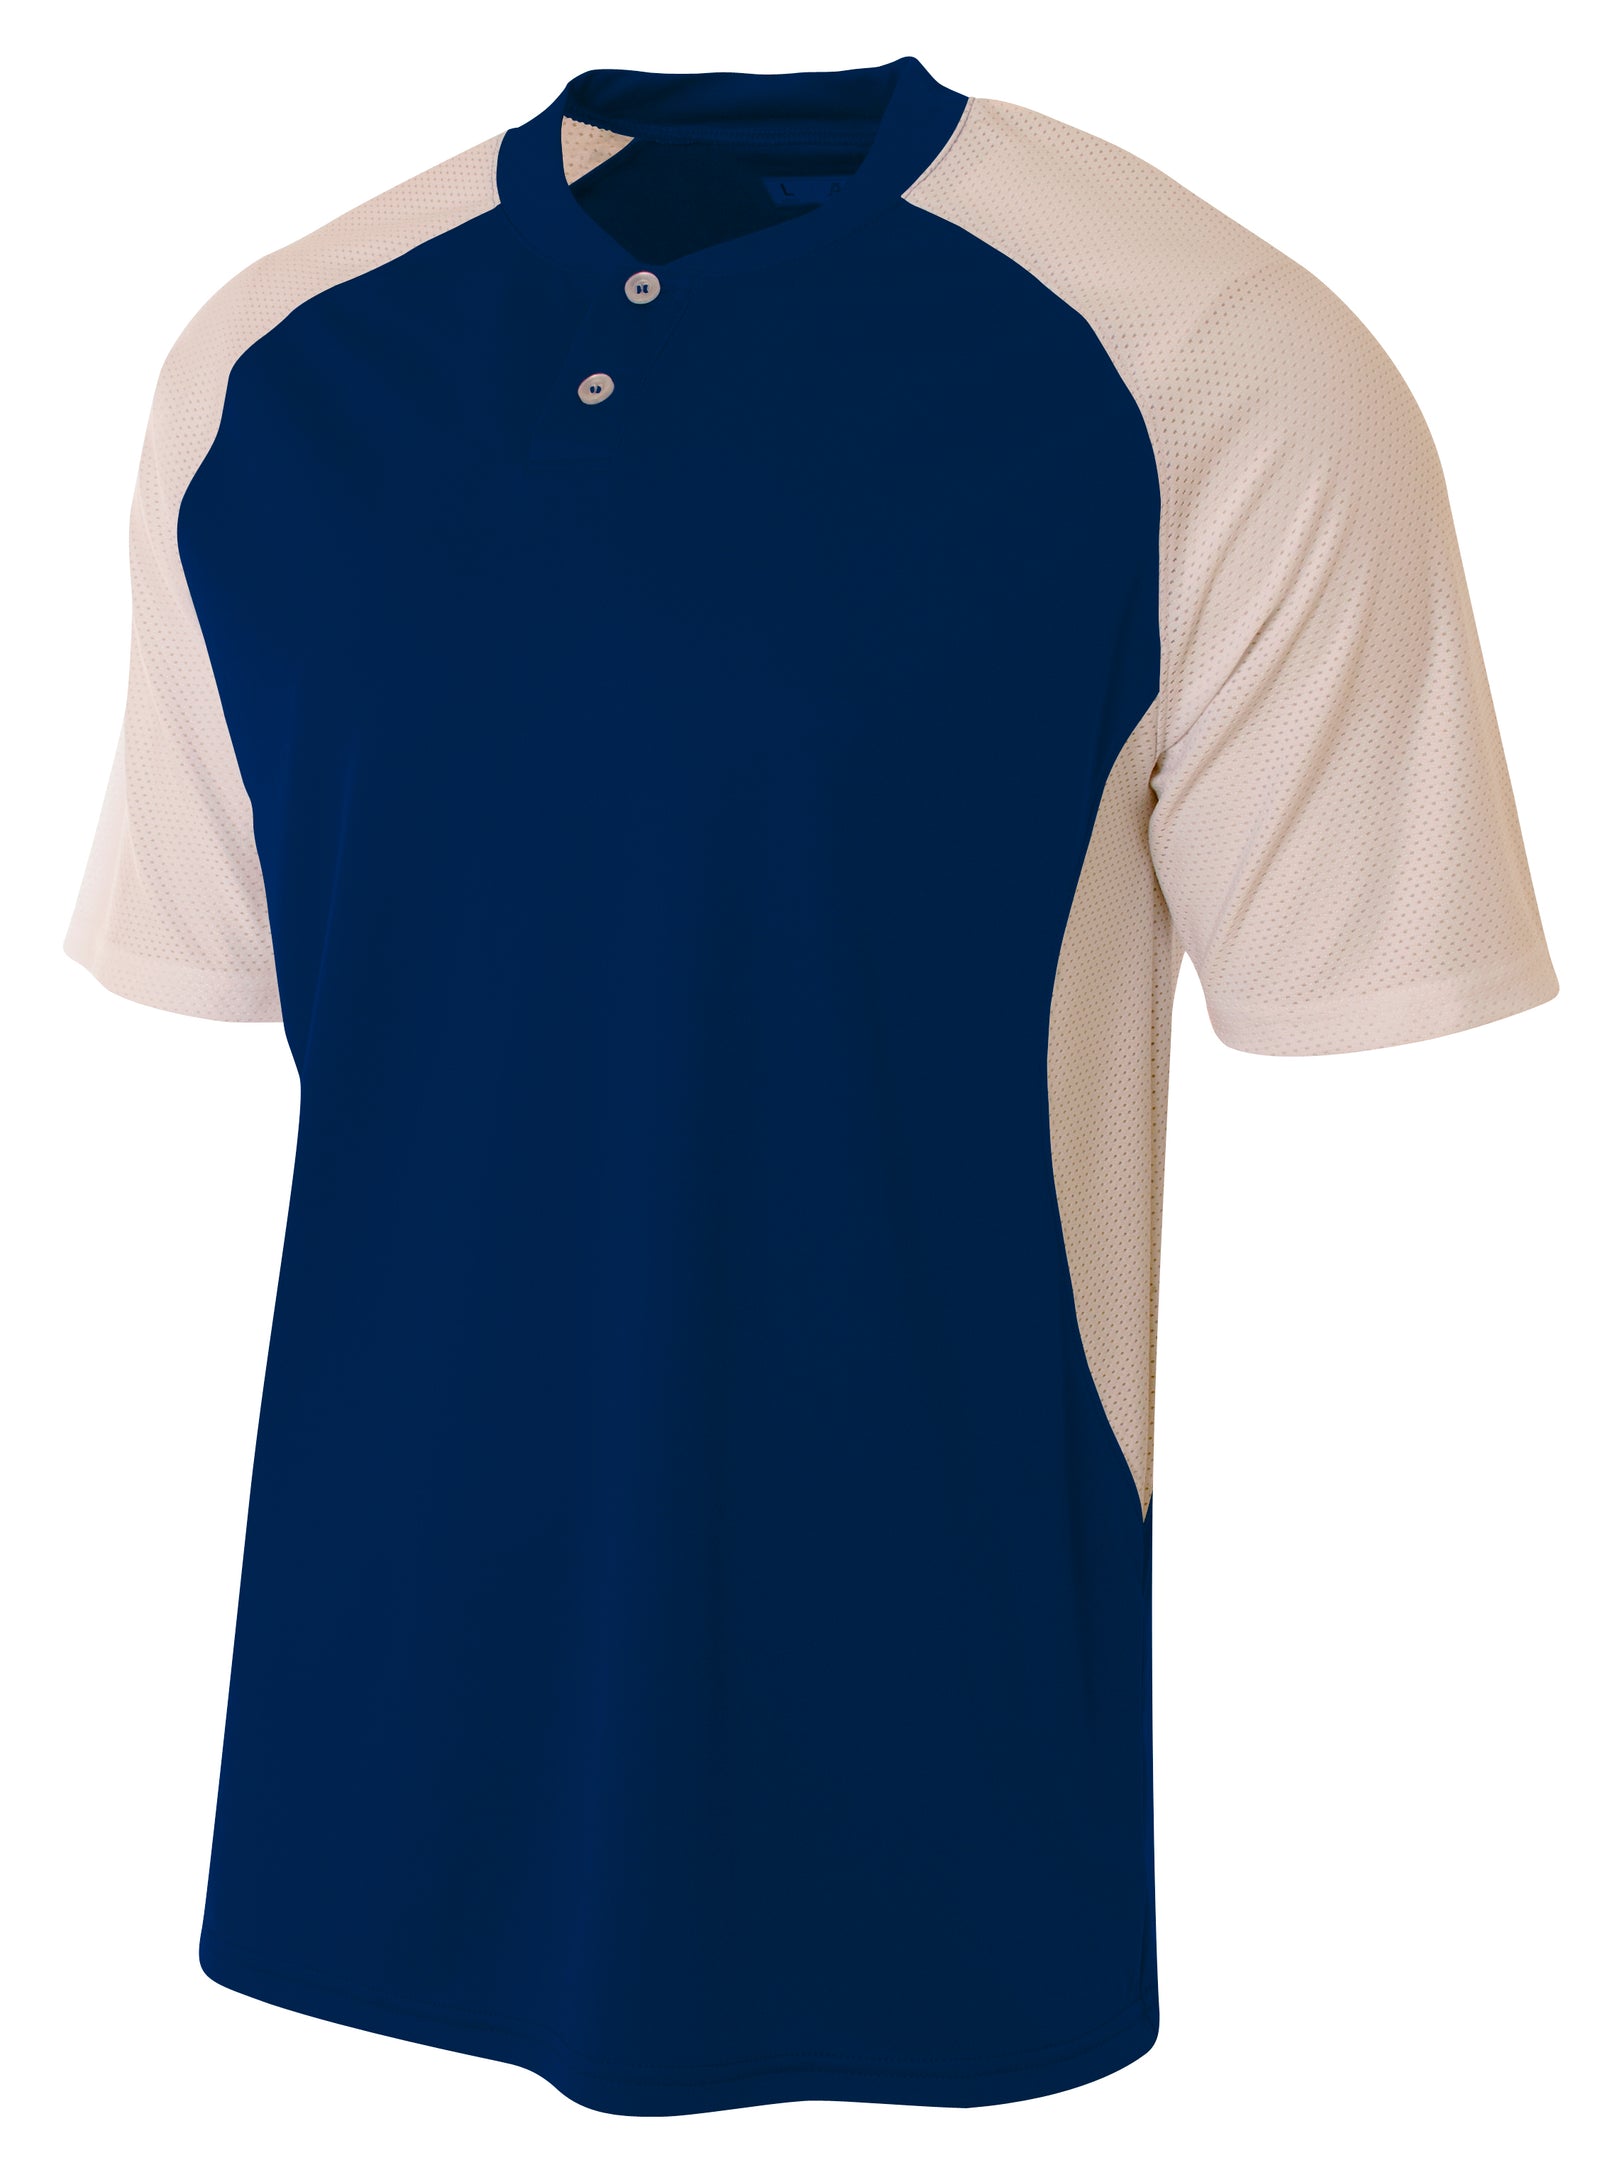 Navy/white A4 Contrast Henley